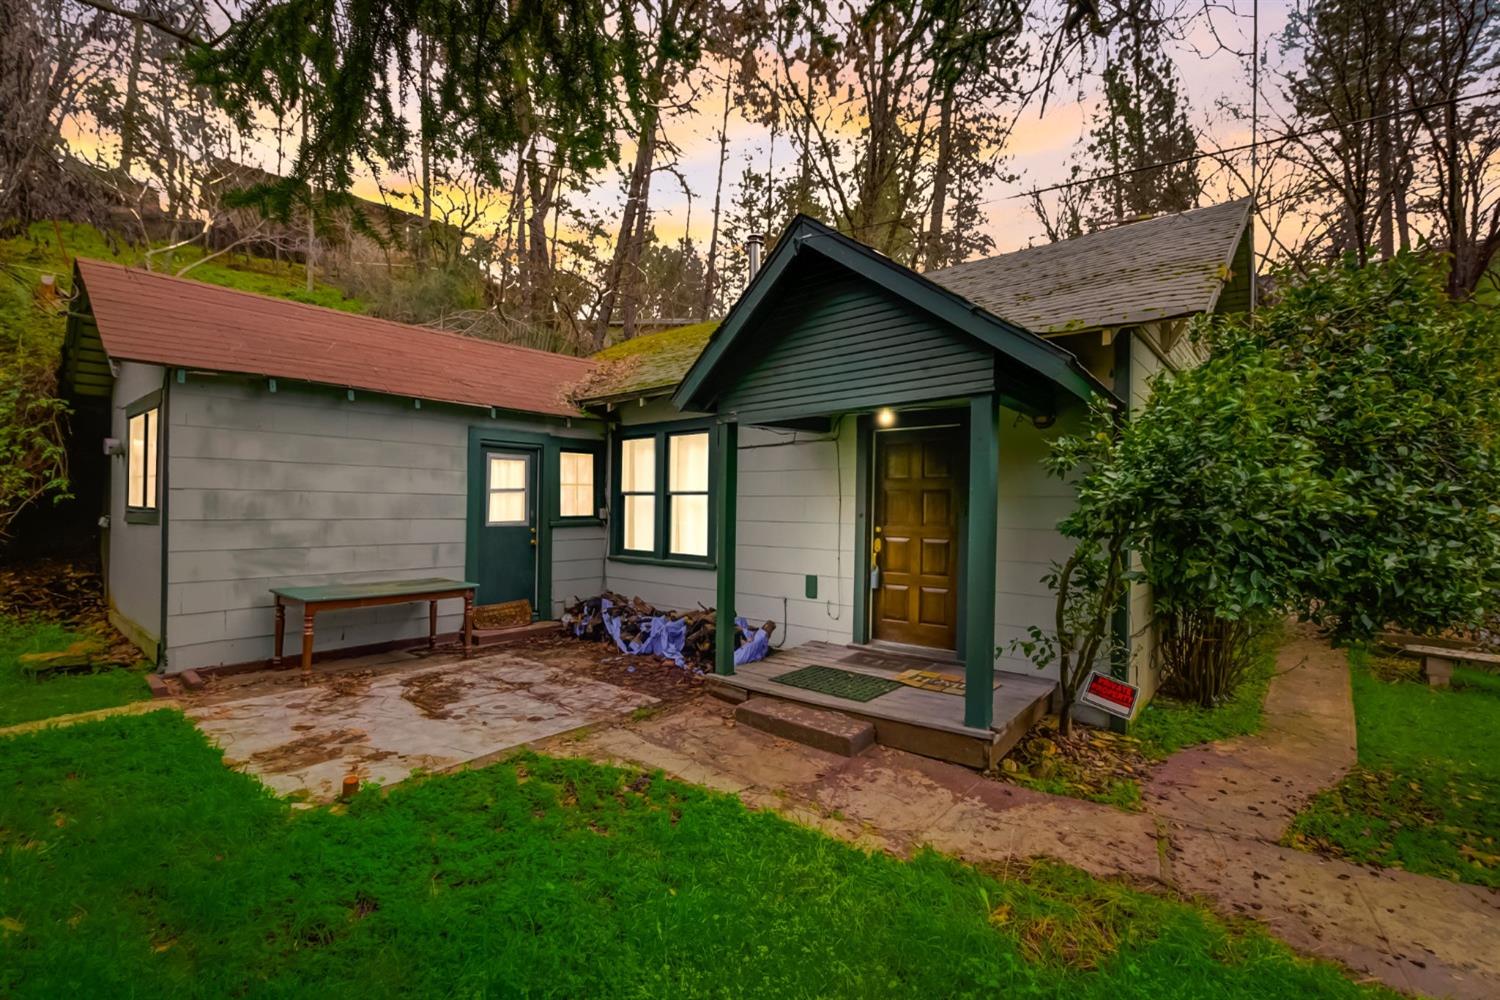 Photo of 3091 Goldner St in Placerville, CA